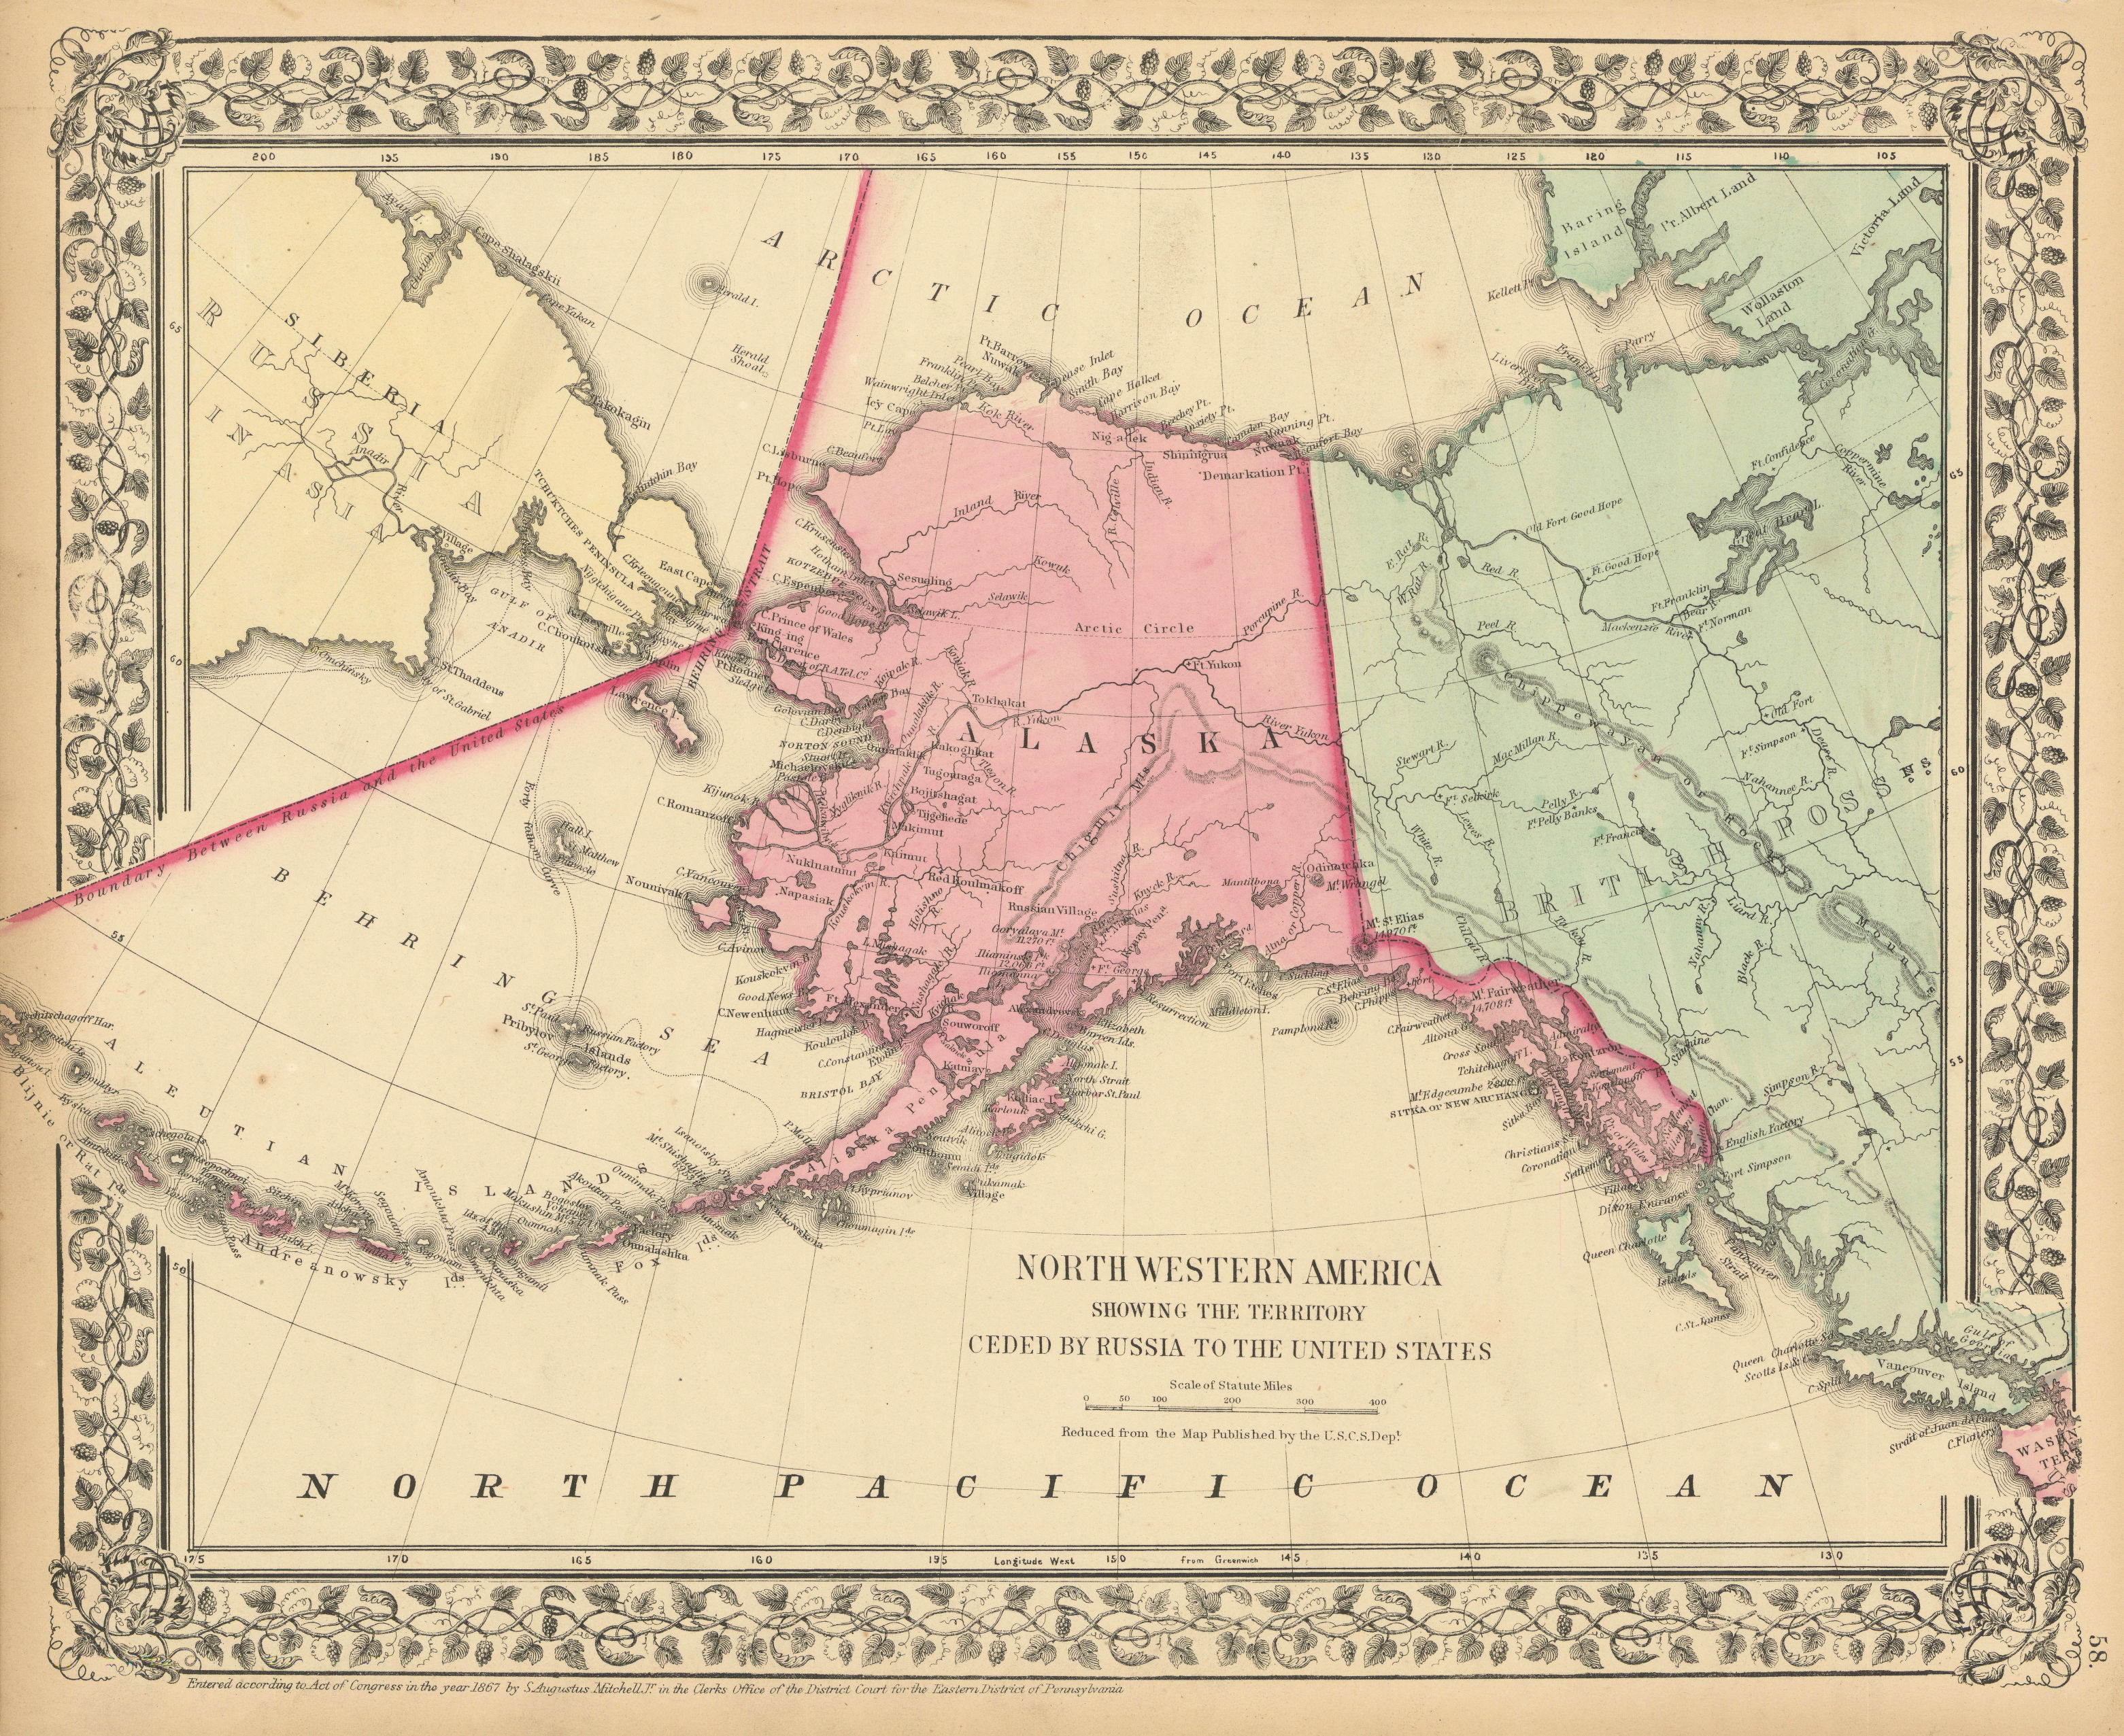 Associate Product Northwestern America showing… Territory ceded by Russia Alaska MITCHELL 1869 map